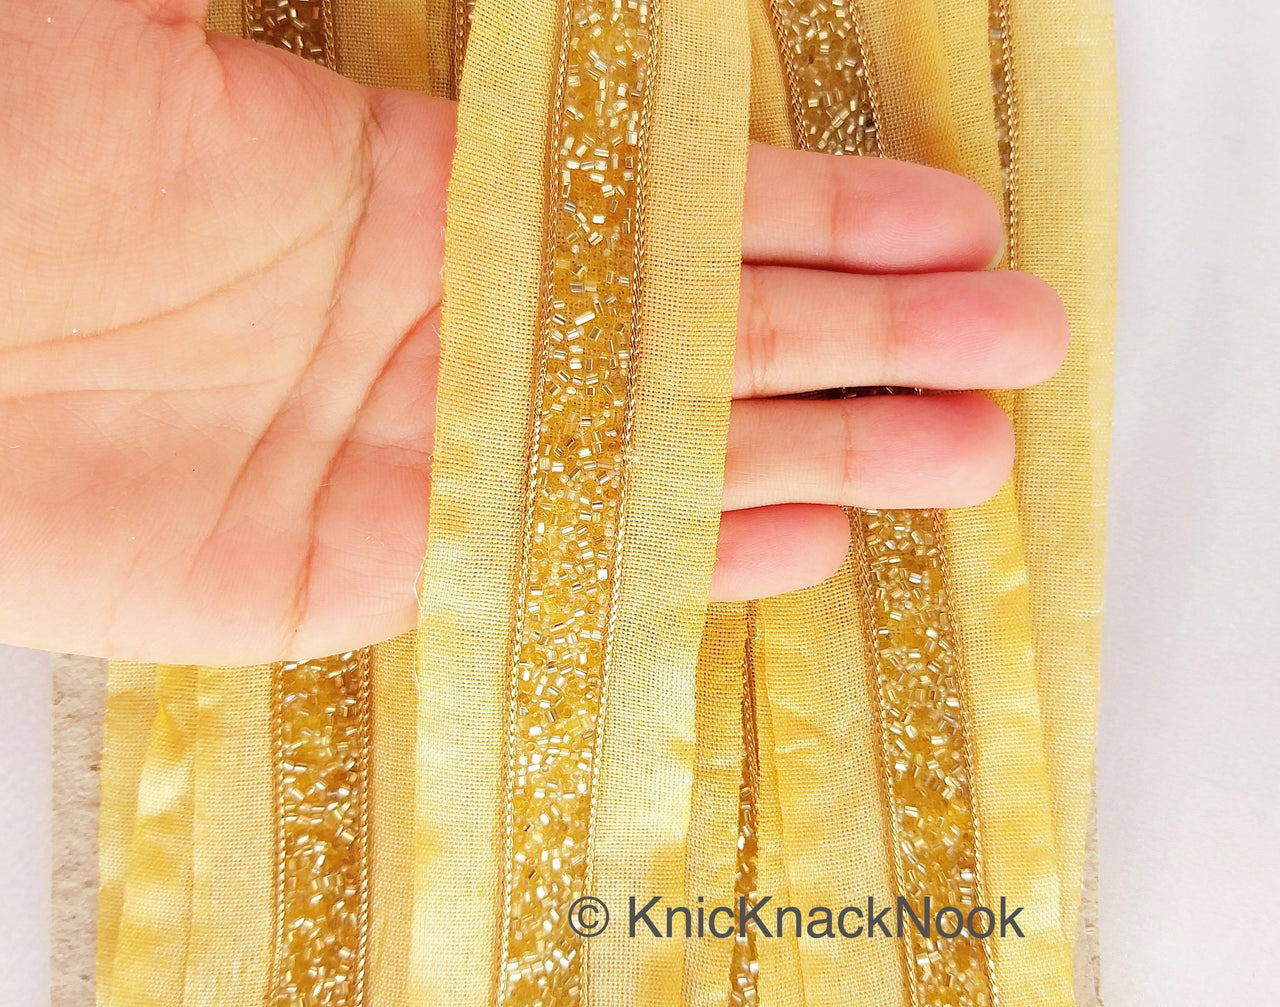 Wholesale Beige Fabric Trim With Gold Seed Beads And Gold Bugle Beads, Beaded Trim, 